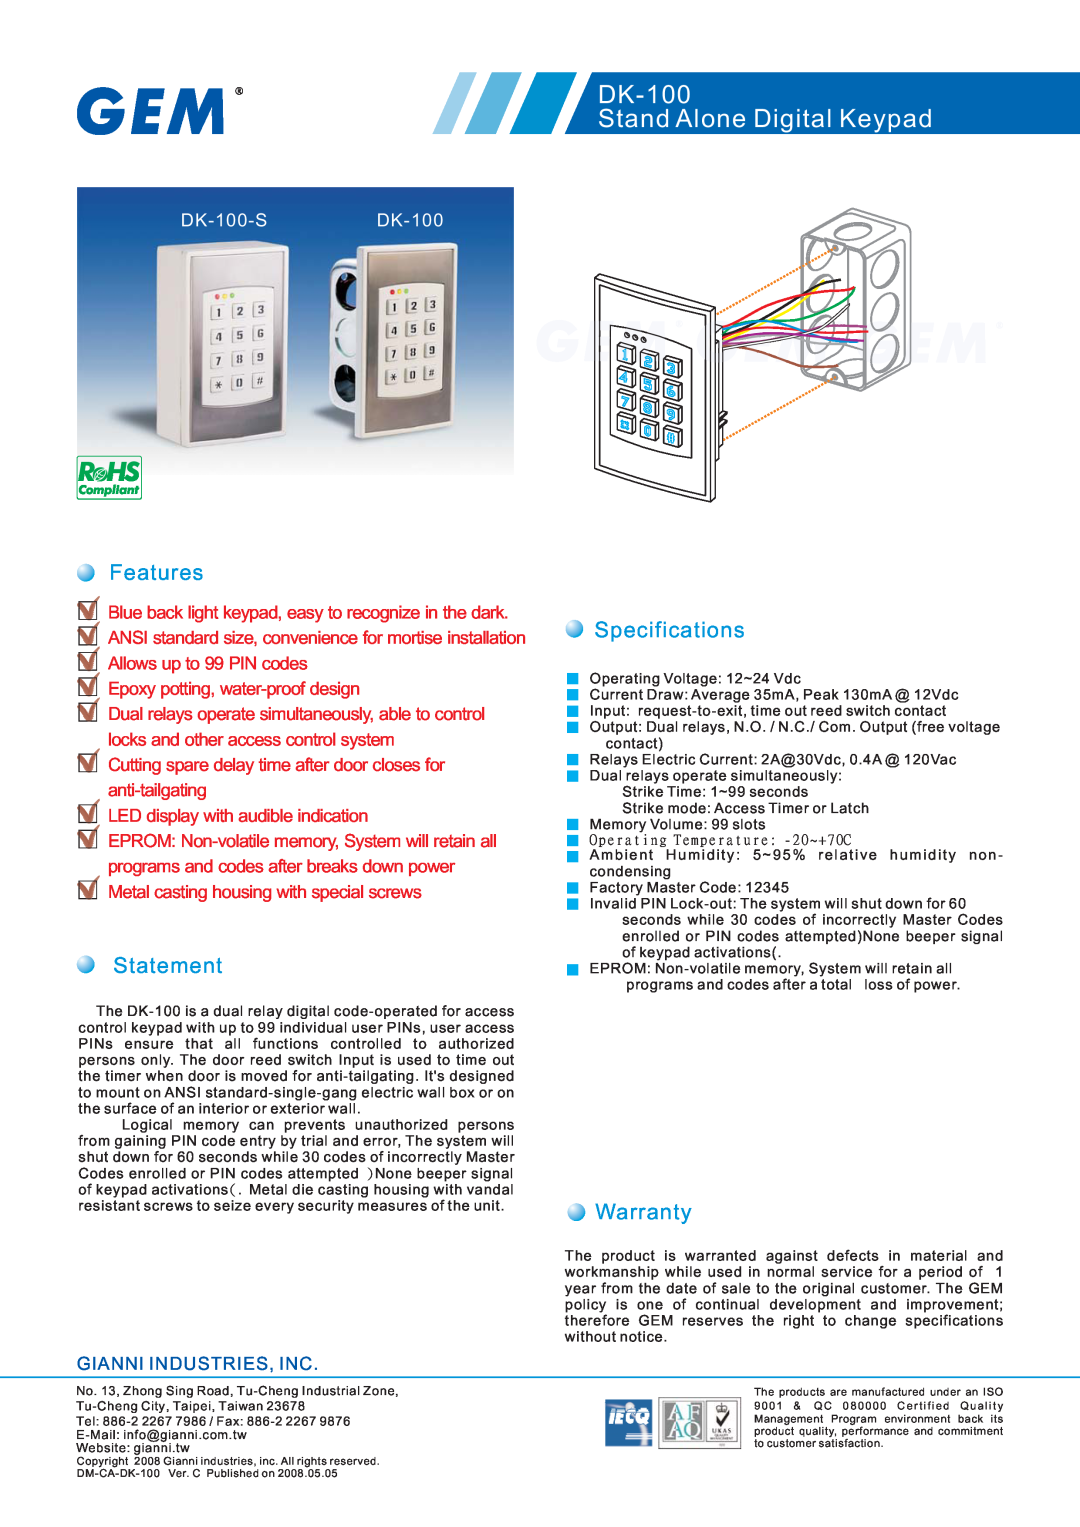 Gianni Industries specifications DK-100 Stand Alone Digital Keypad, Features, Statement, Specifications, Warranty 